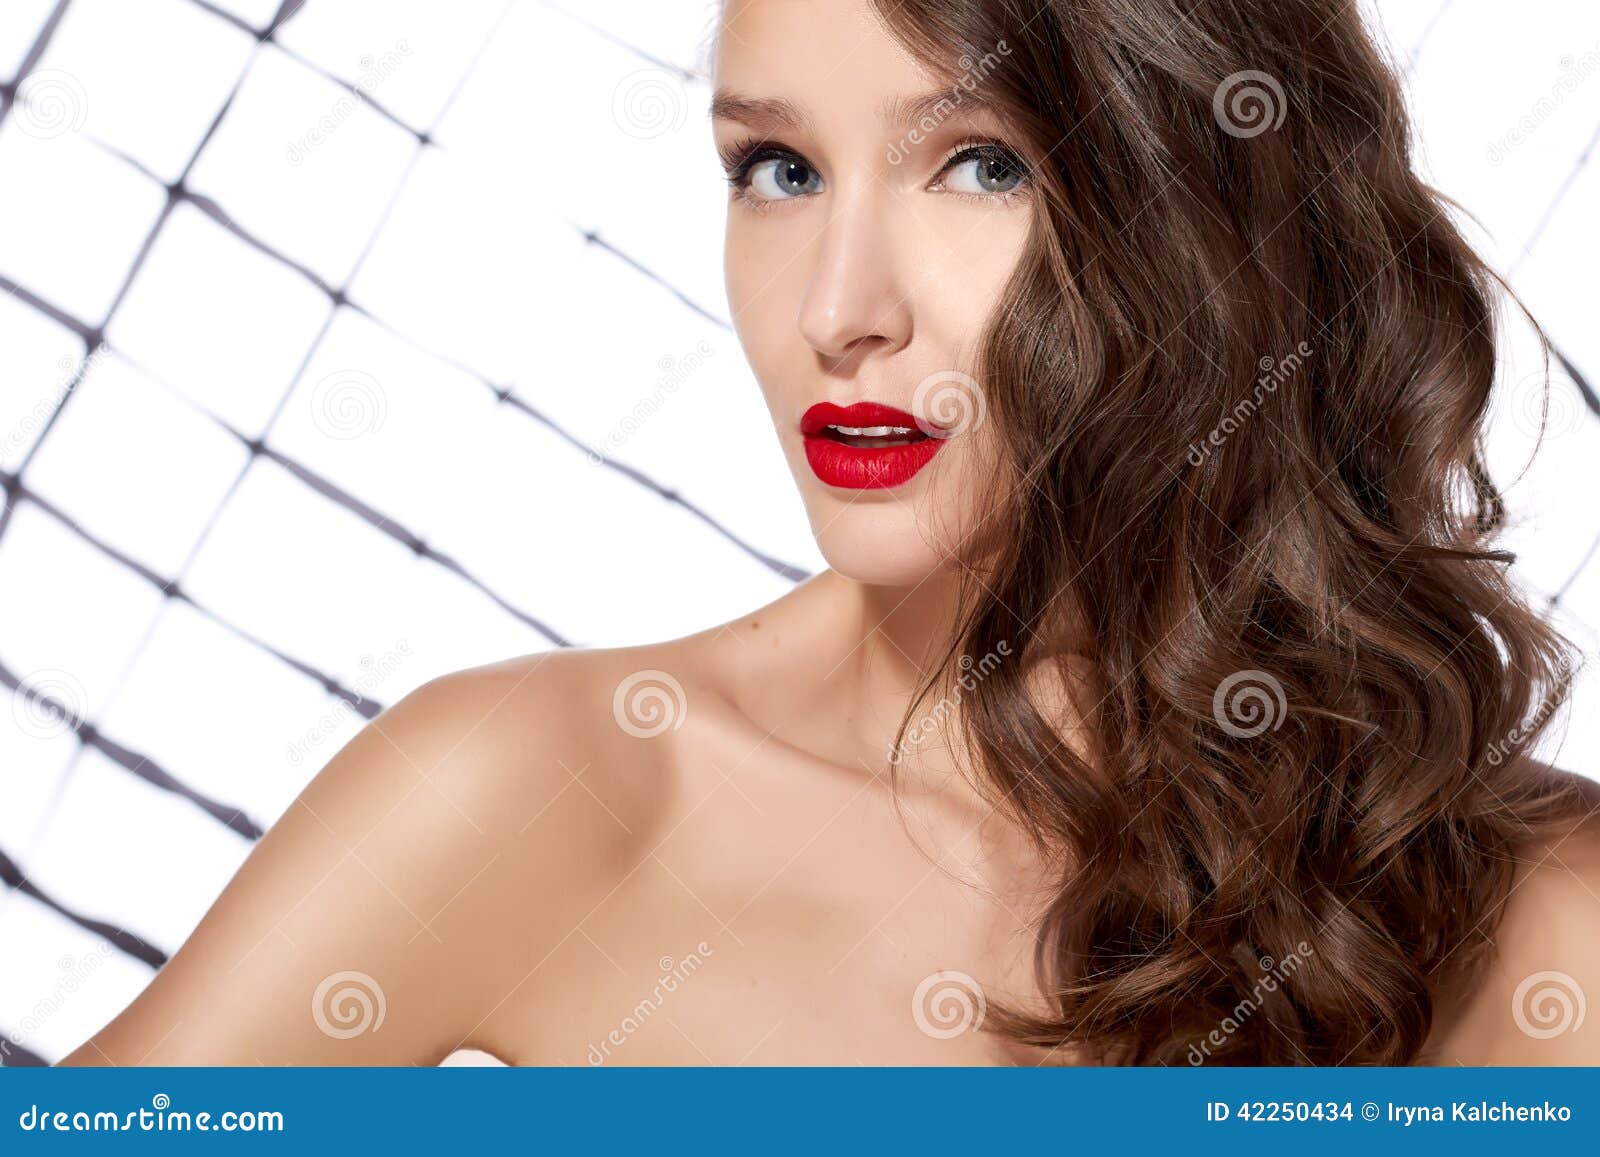 Young Beautiful Girl With Dark Curly Hair With Red Lips And